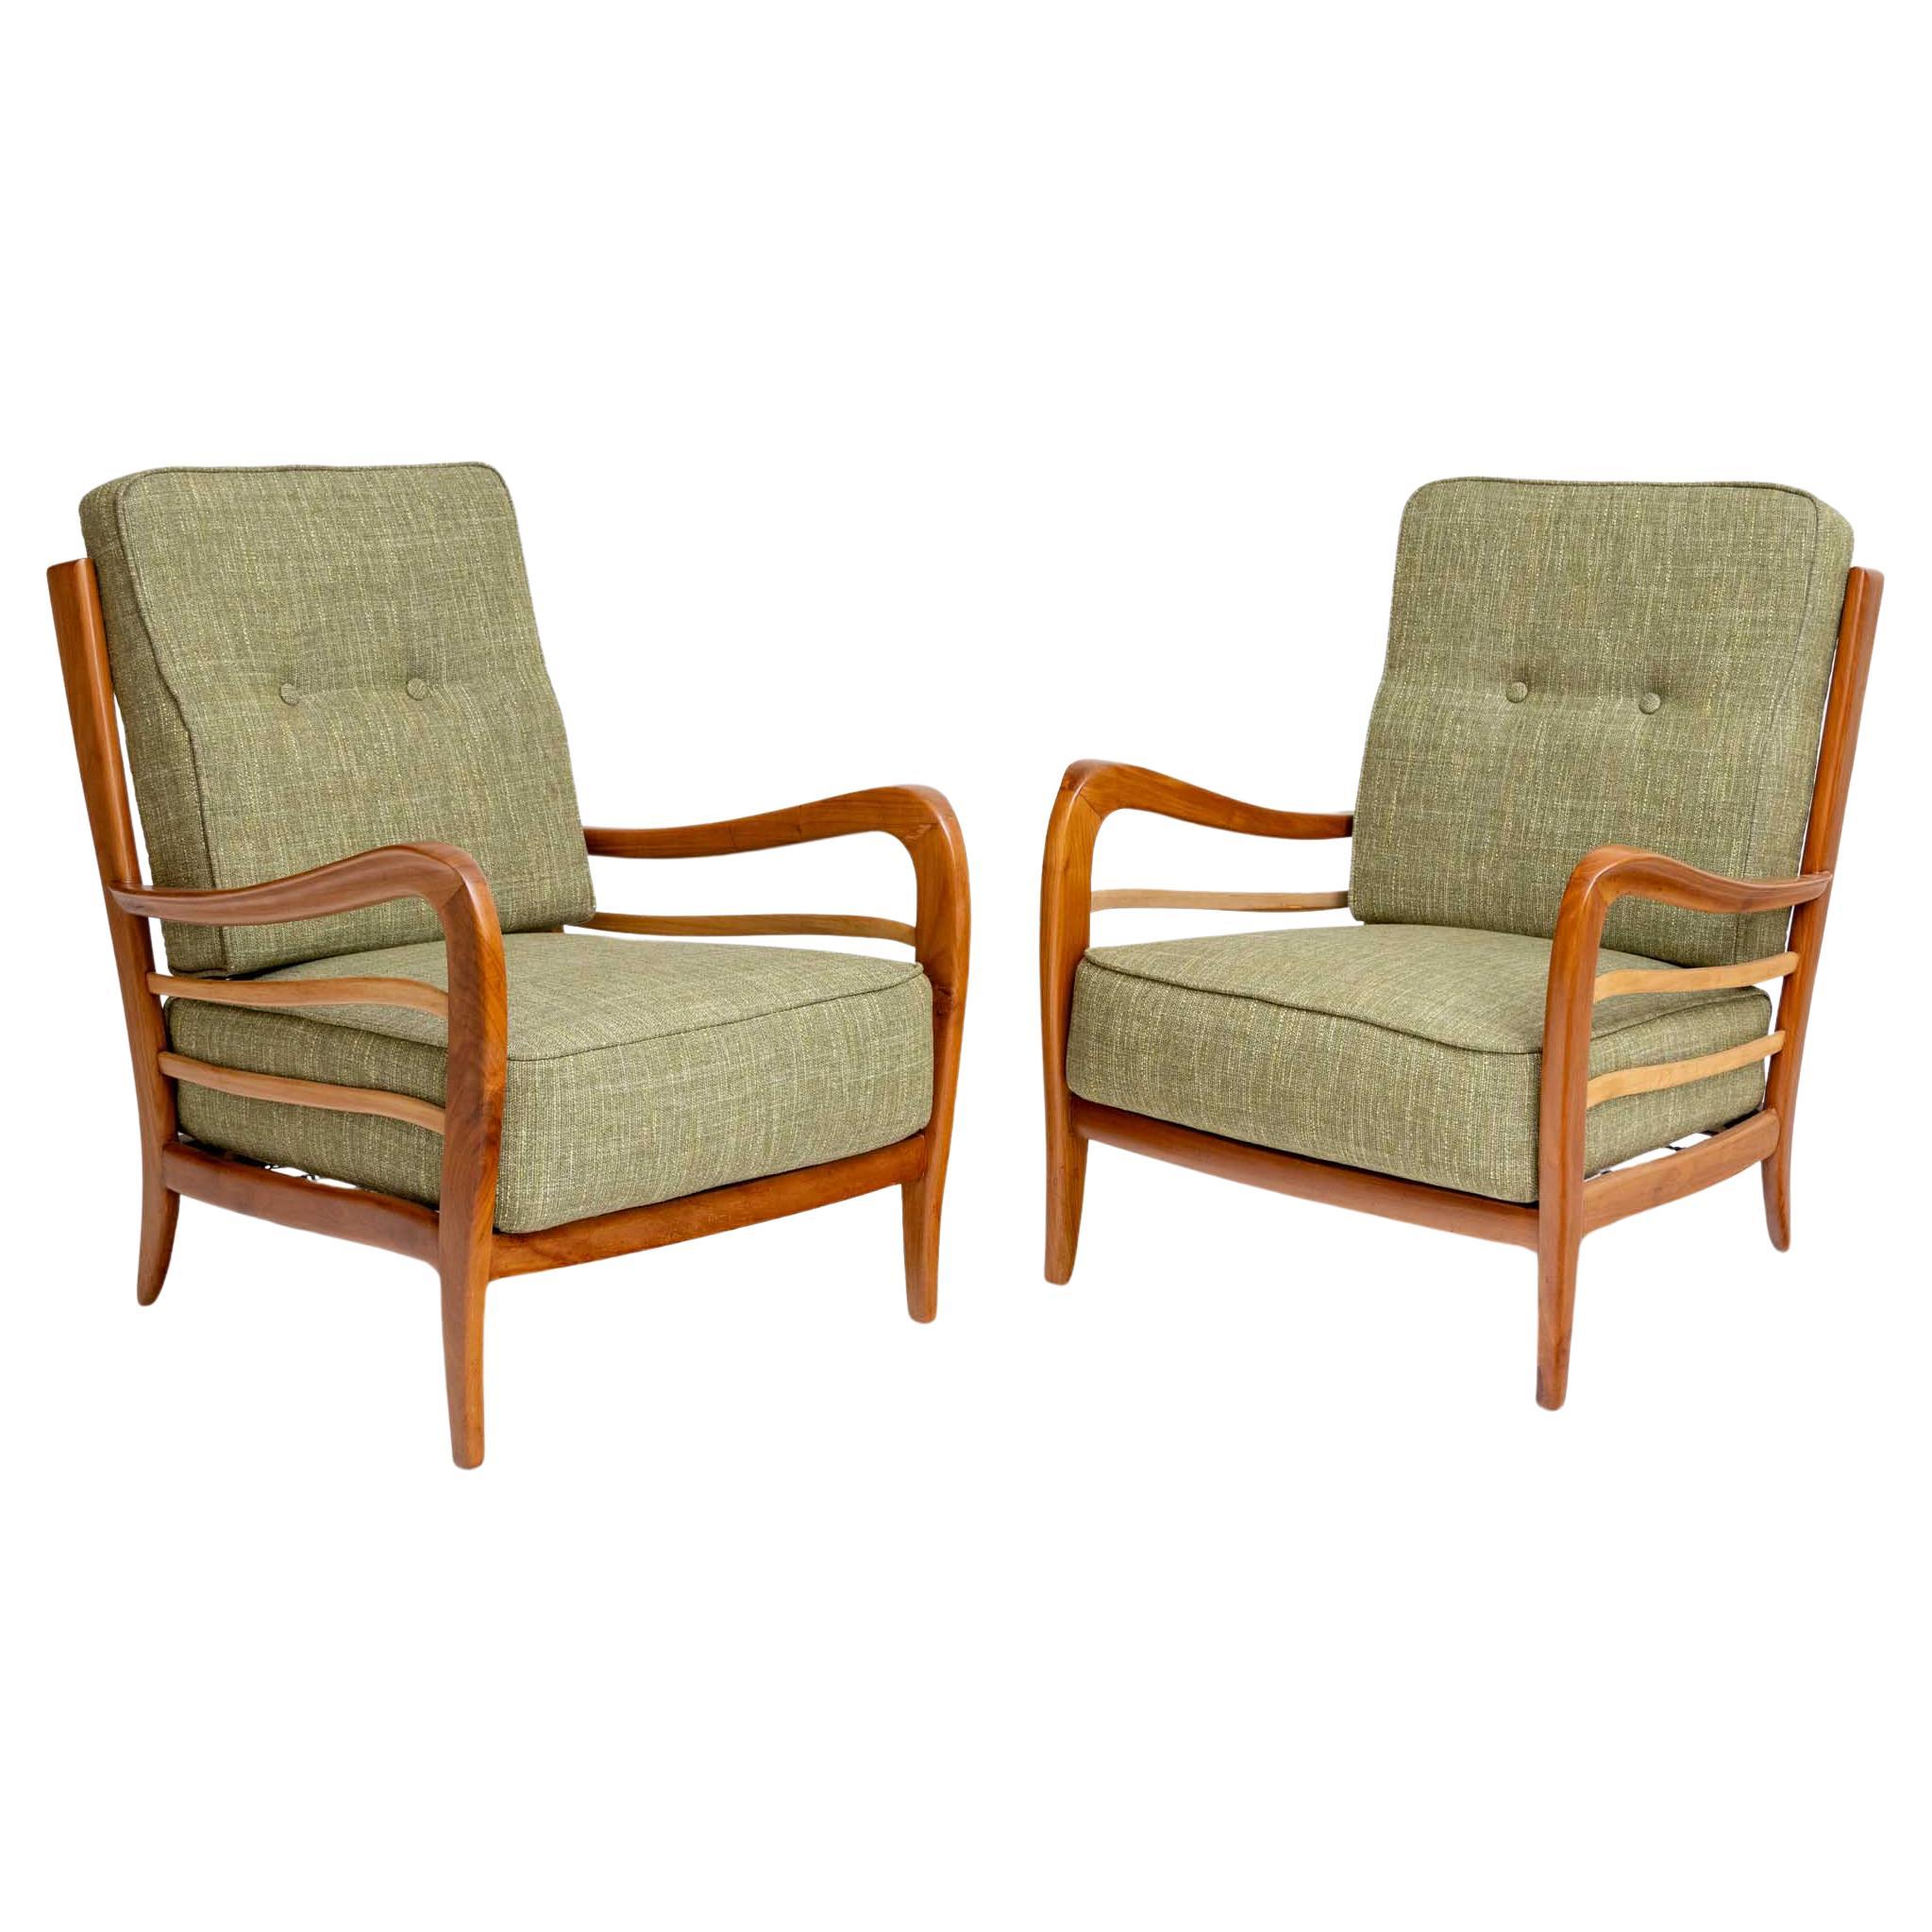 Pair of Lounge Chairs in Cherry, green Upholstery attr. Paolo Buffa, Italy 1950s For Sale